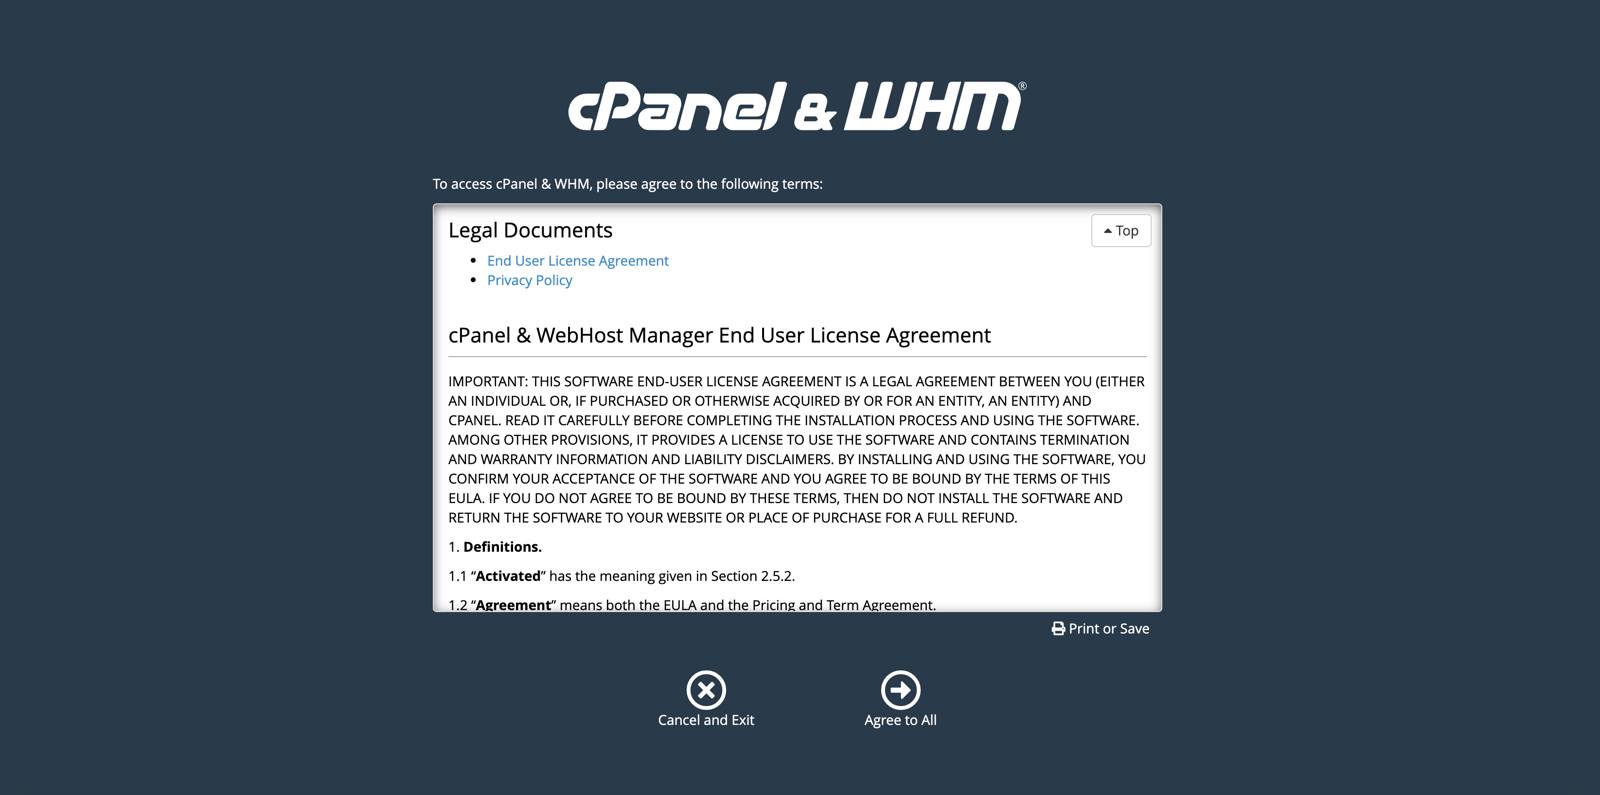 Agree to cPanel and WHM&rsquo;s terms